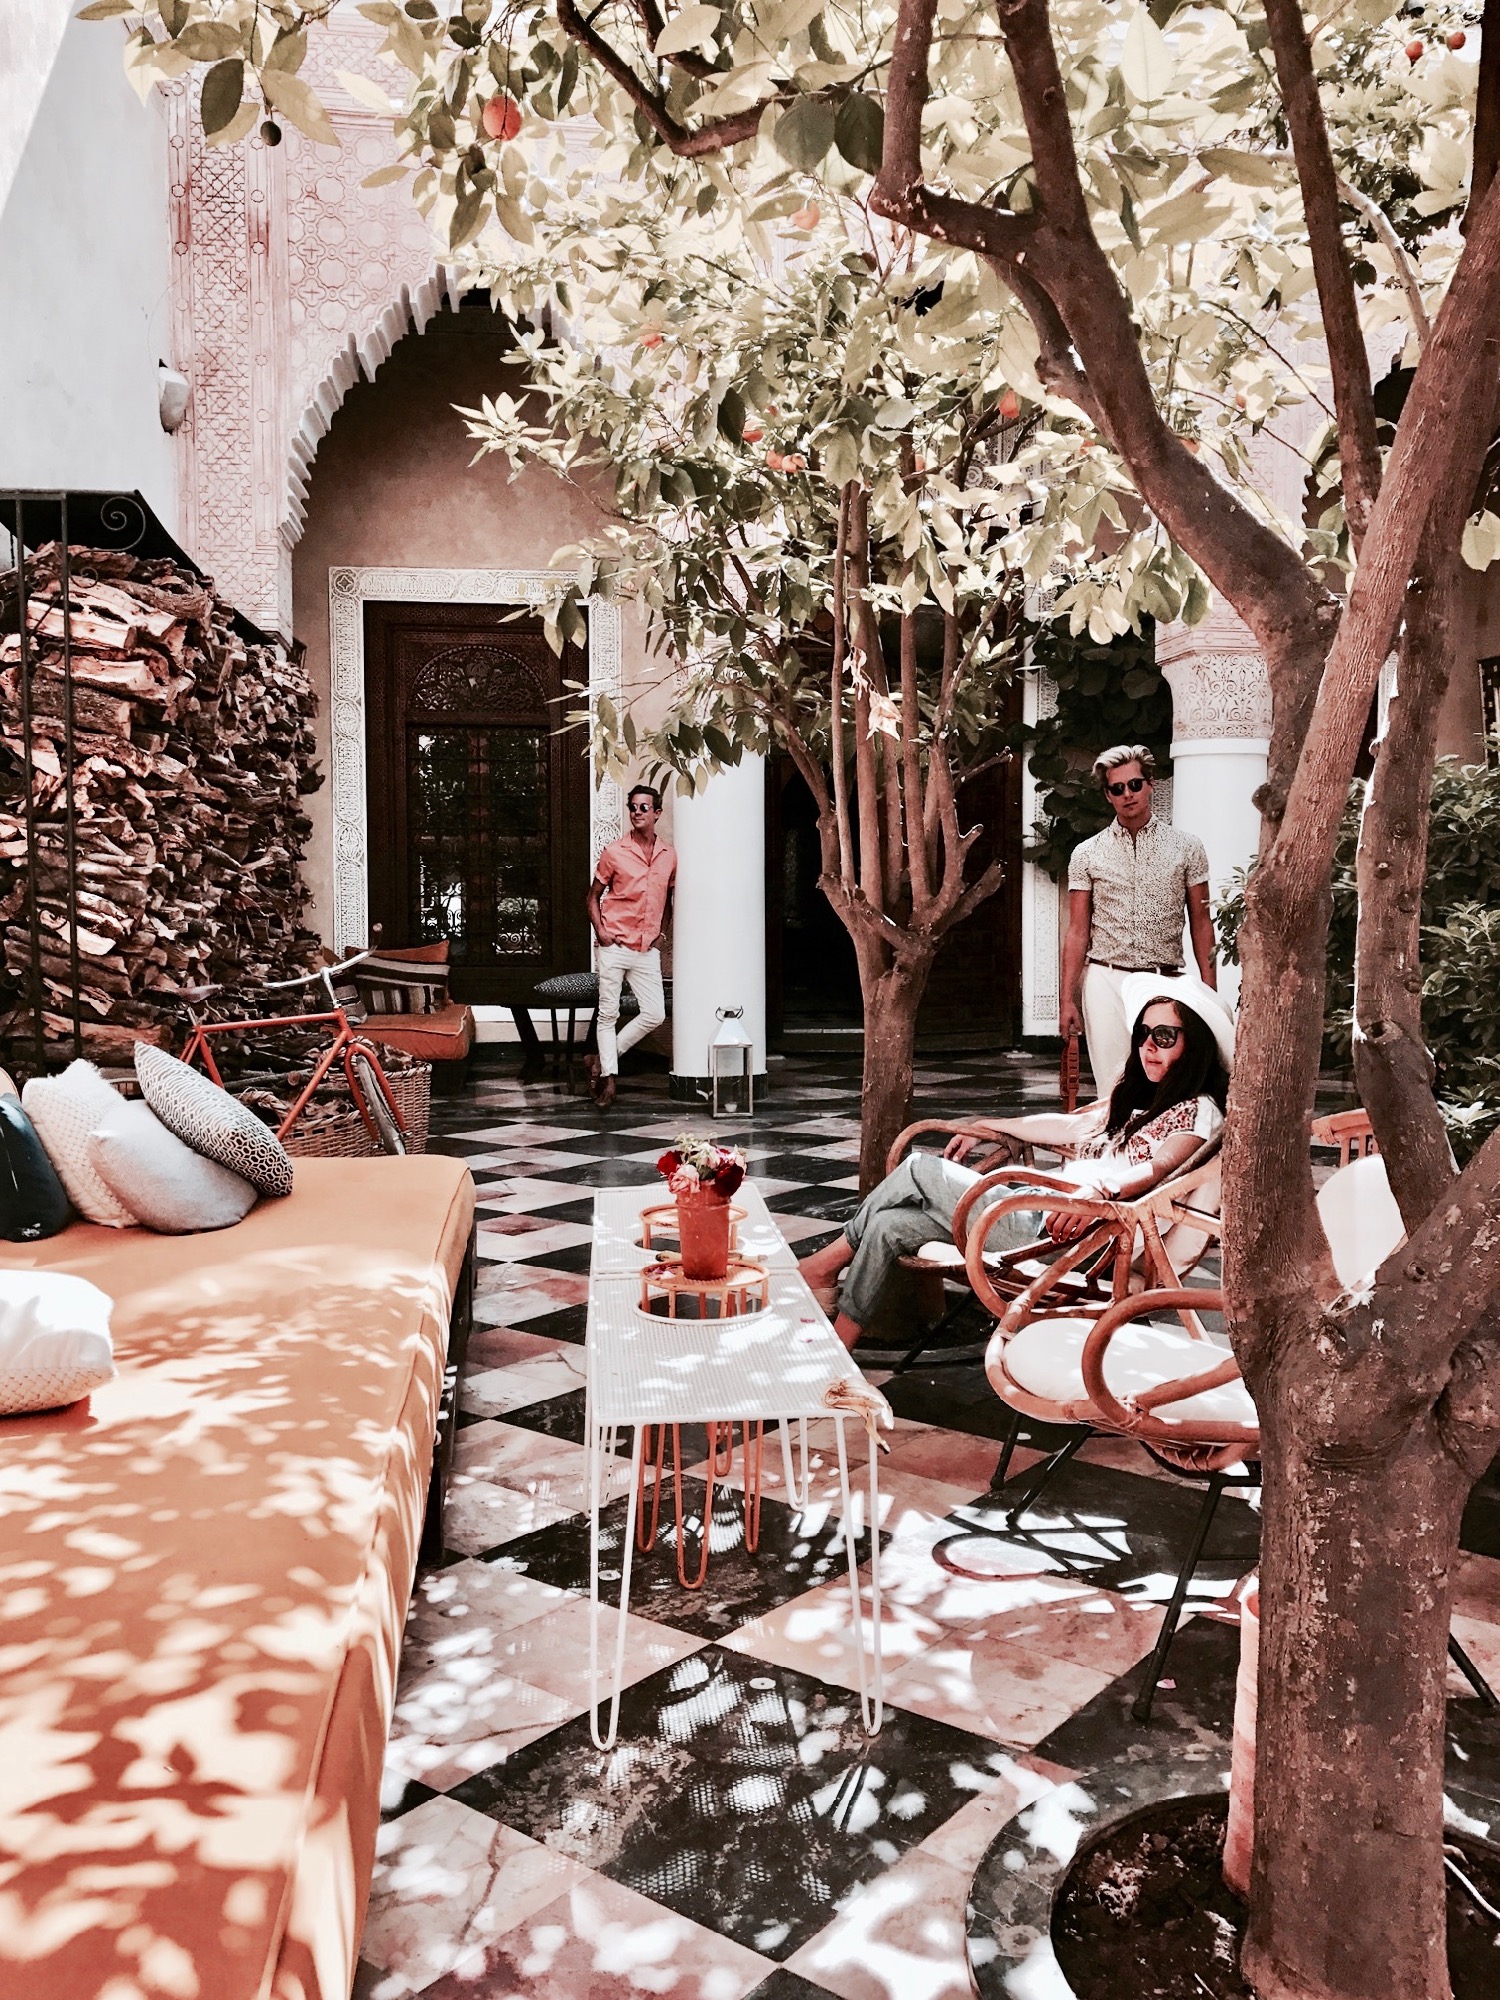 FINDING ENDLESS INSPIRATION IN MOROCCO — THE STEINITZ